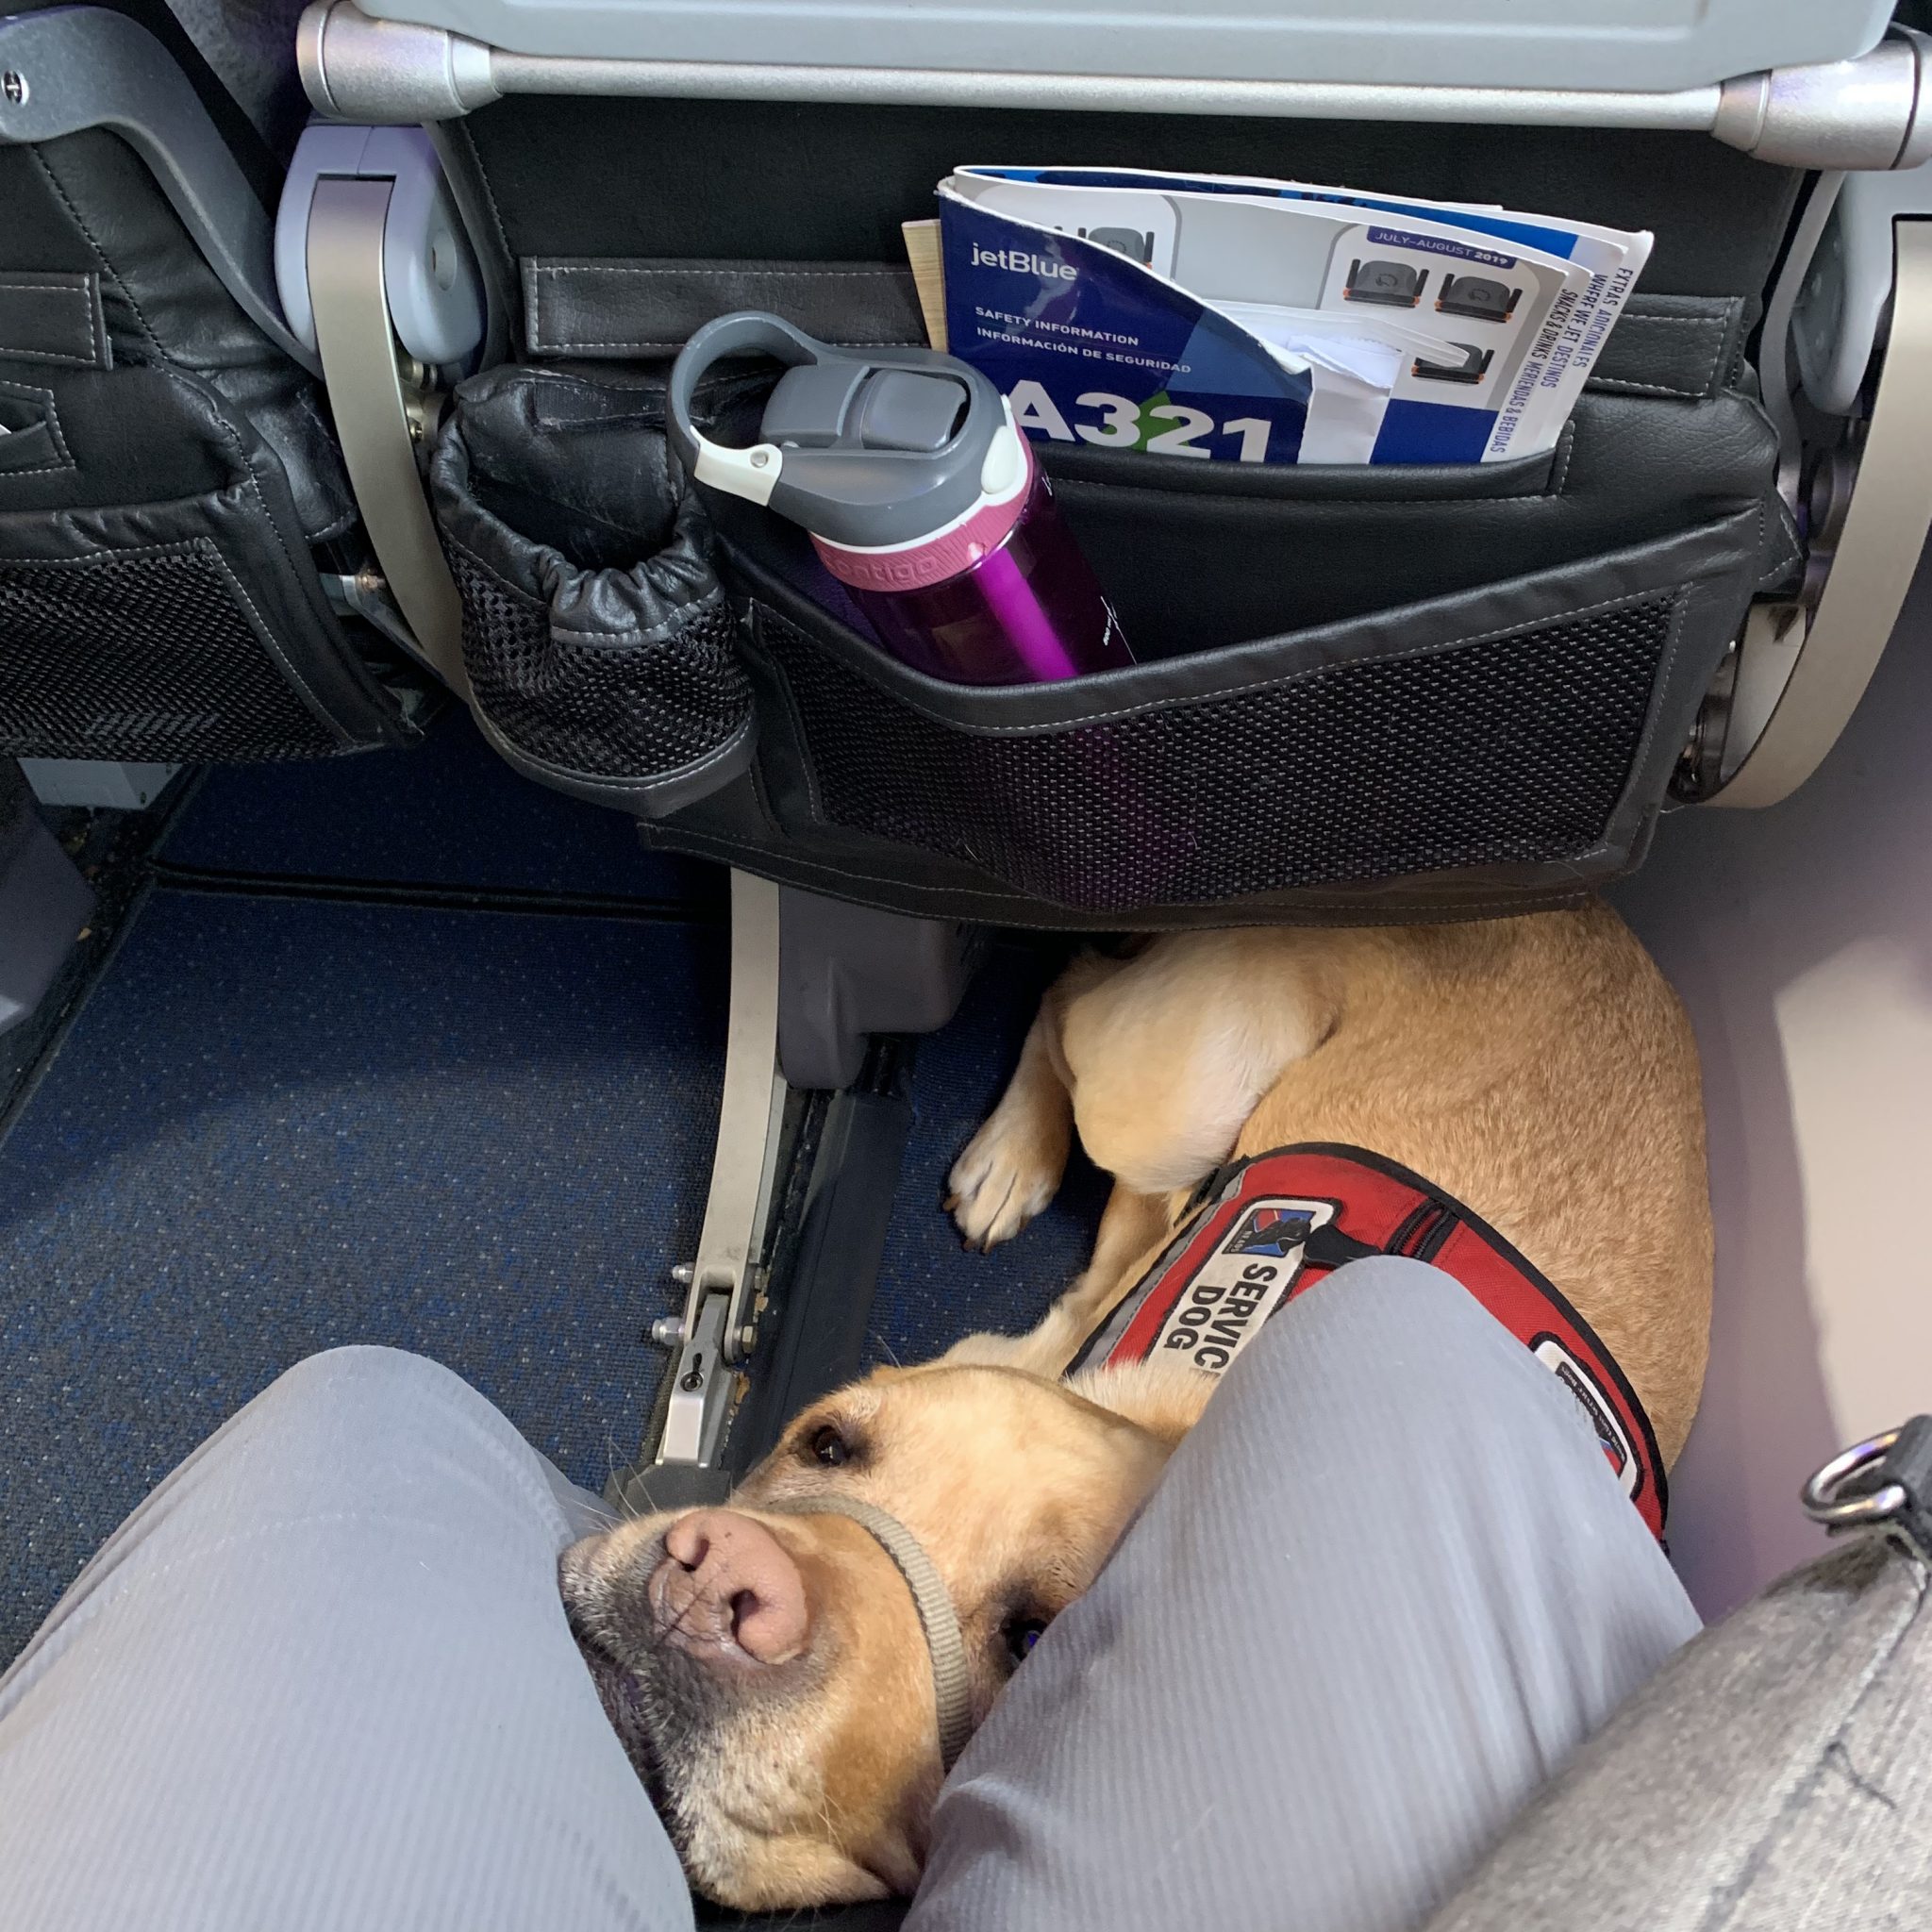 NEADS Supports New DOT Rules for Flying with Service Dogs - NEADS World  Class Service Dogs